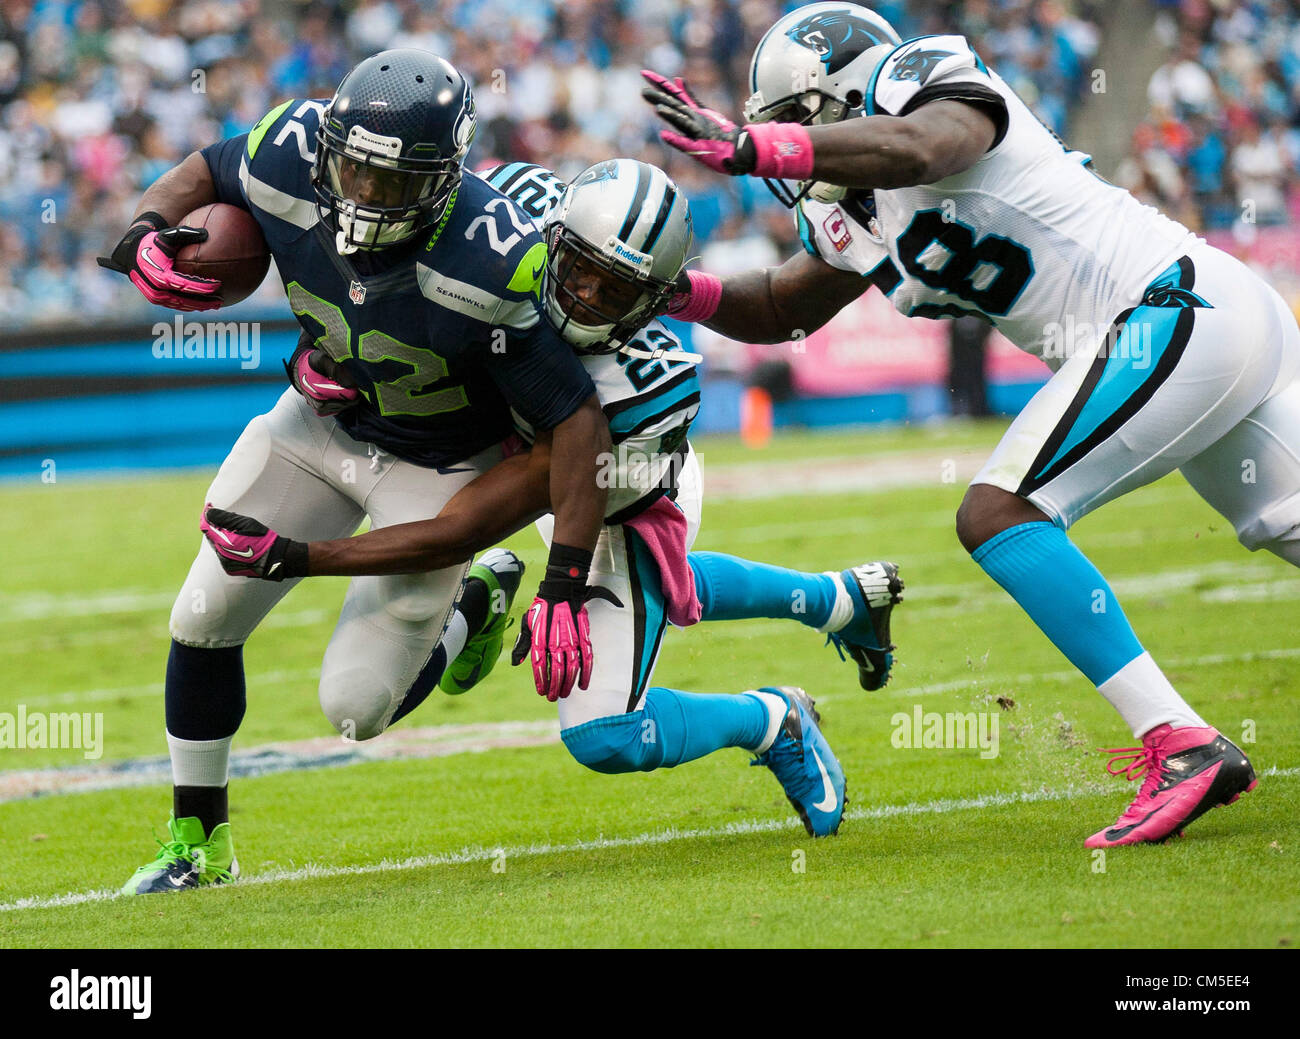 Oct. 07, 2012 - Charlotte, North Carolina, U.S. - Seahawks RB ROBERT TURBIN (22) runs for yardage after a catch during the Panthers vs. Seahawks game at Bank of America Stadium. (Credit Image: © Anantachai Brown/ZUMAPRESS.com) Stock Photo